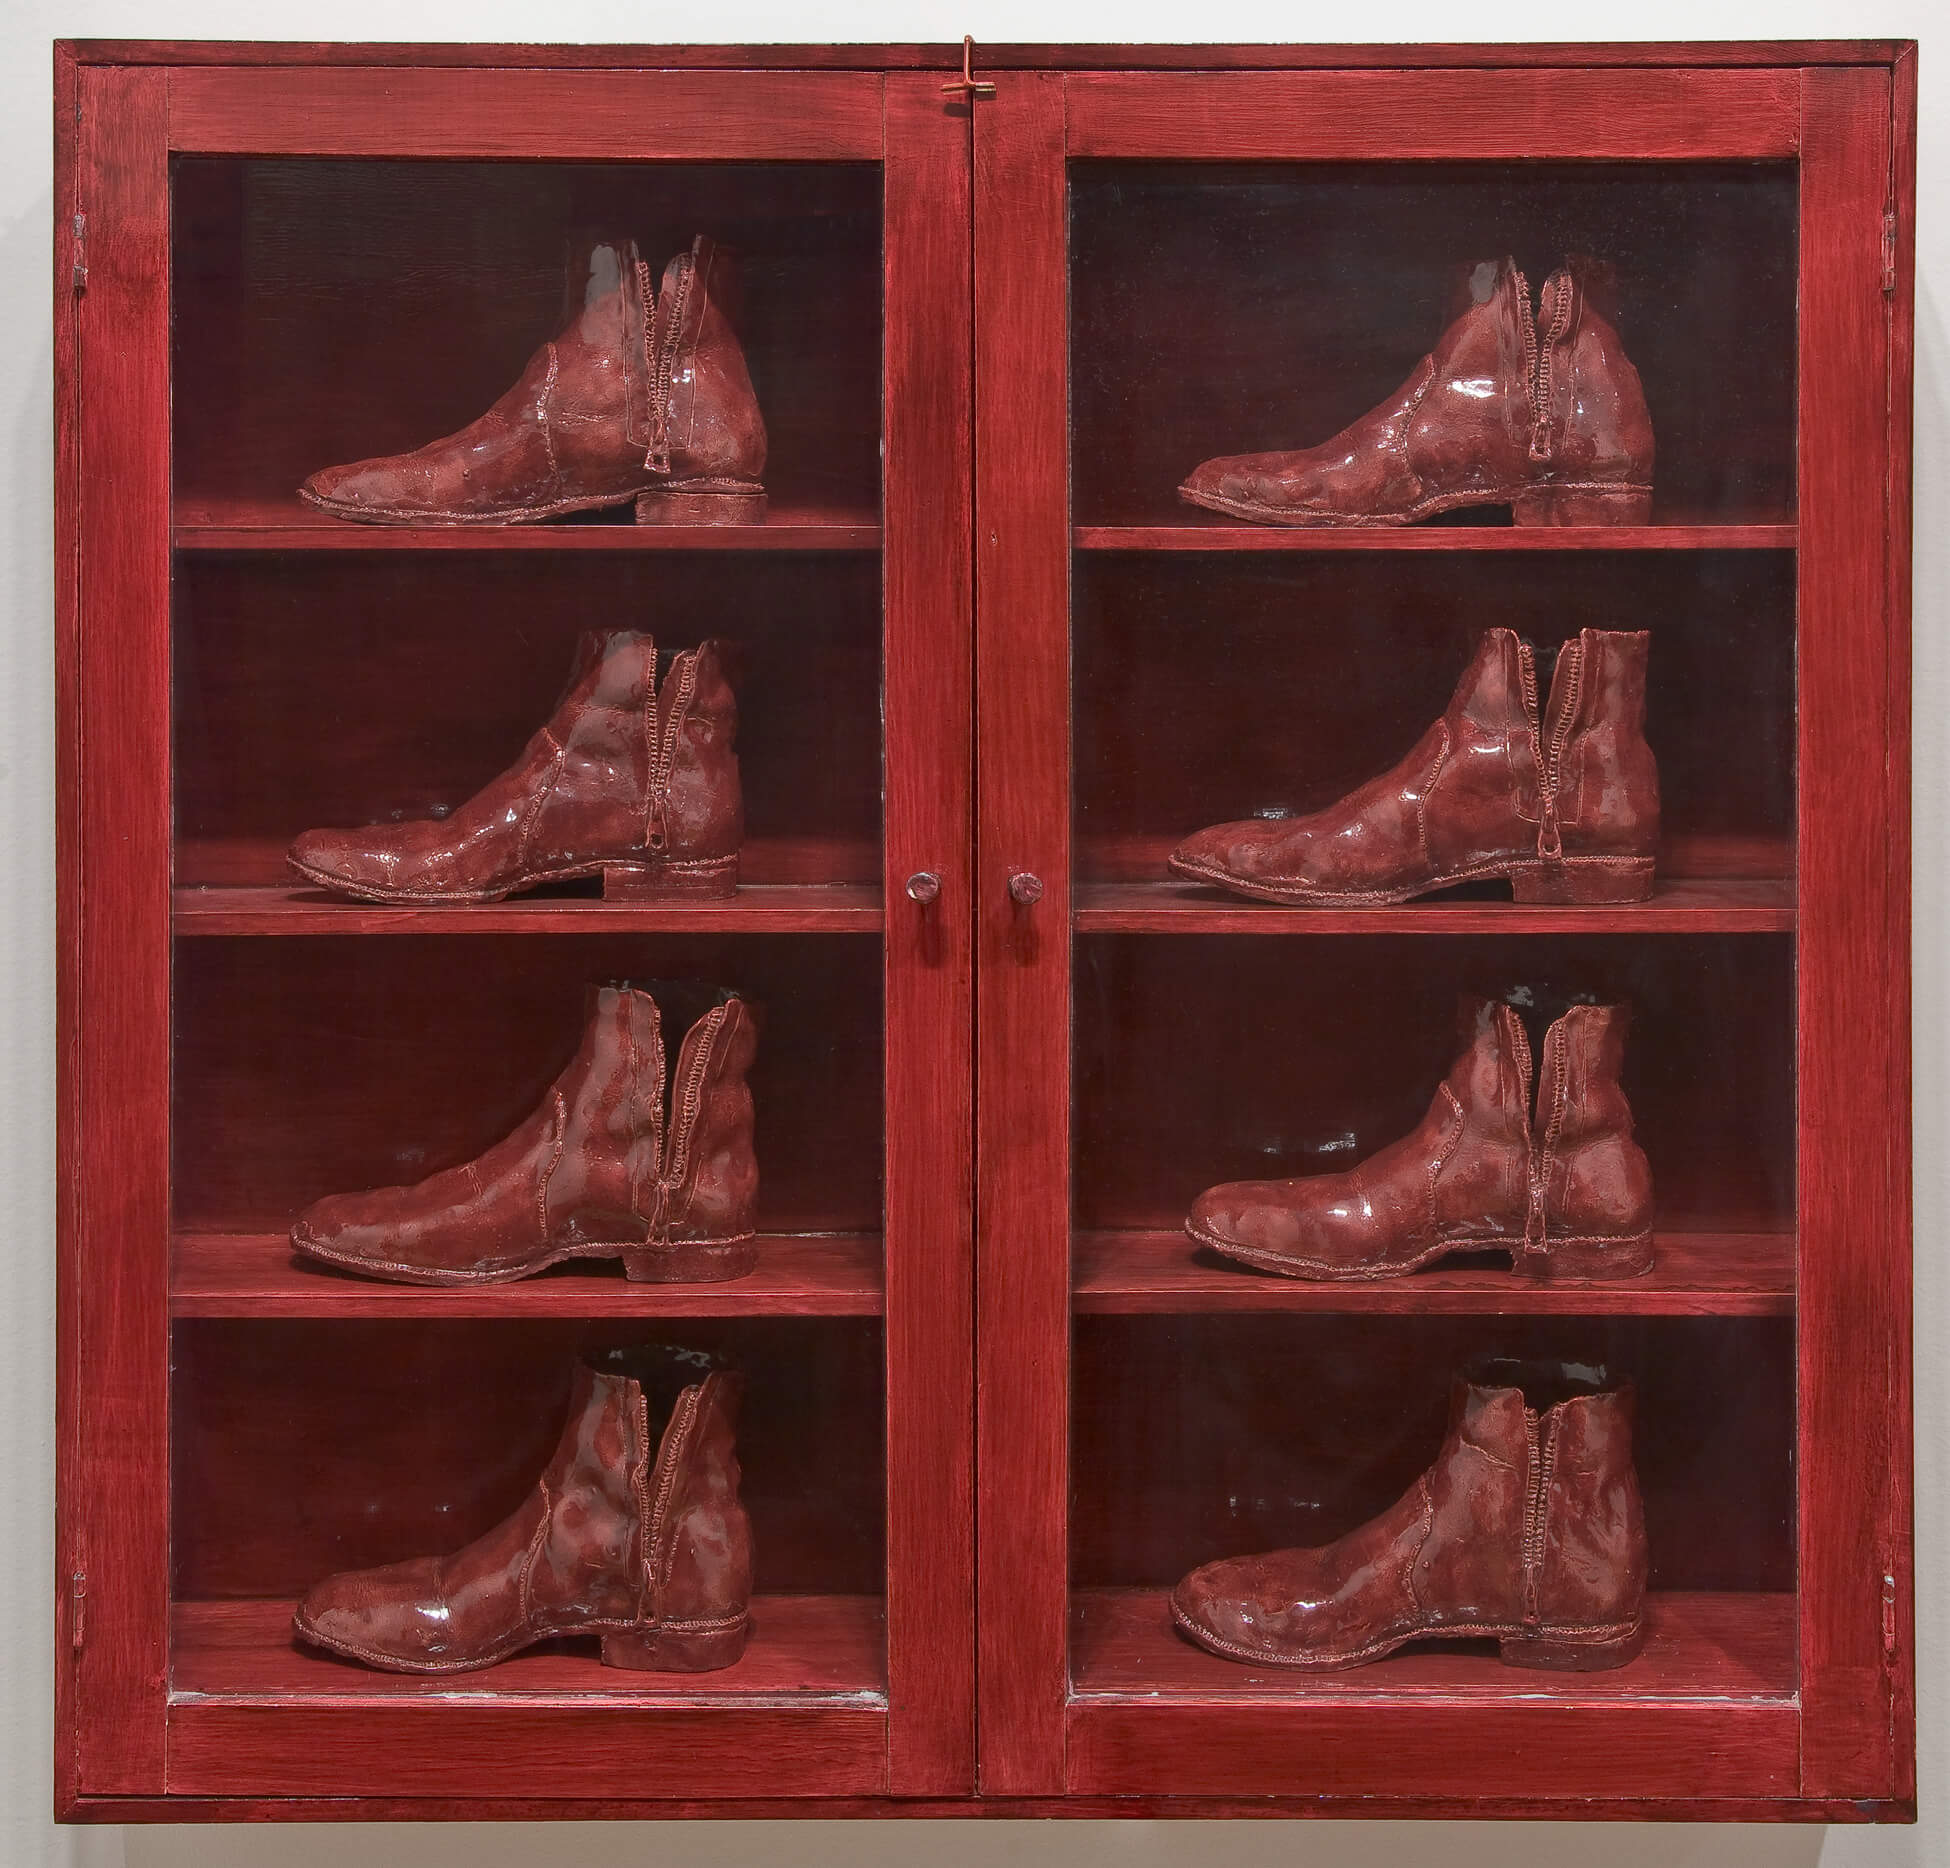 Gathie Falk, Eight Red Boots, 1973